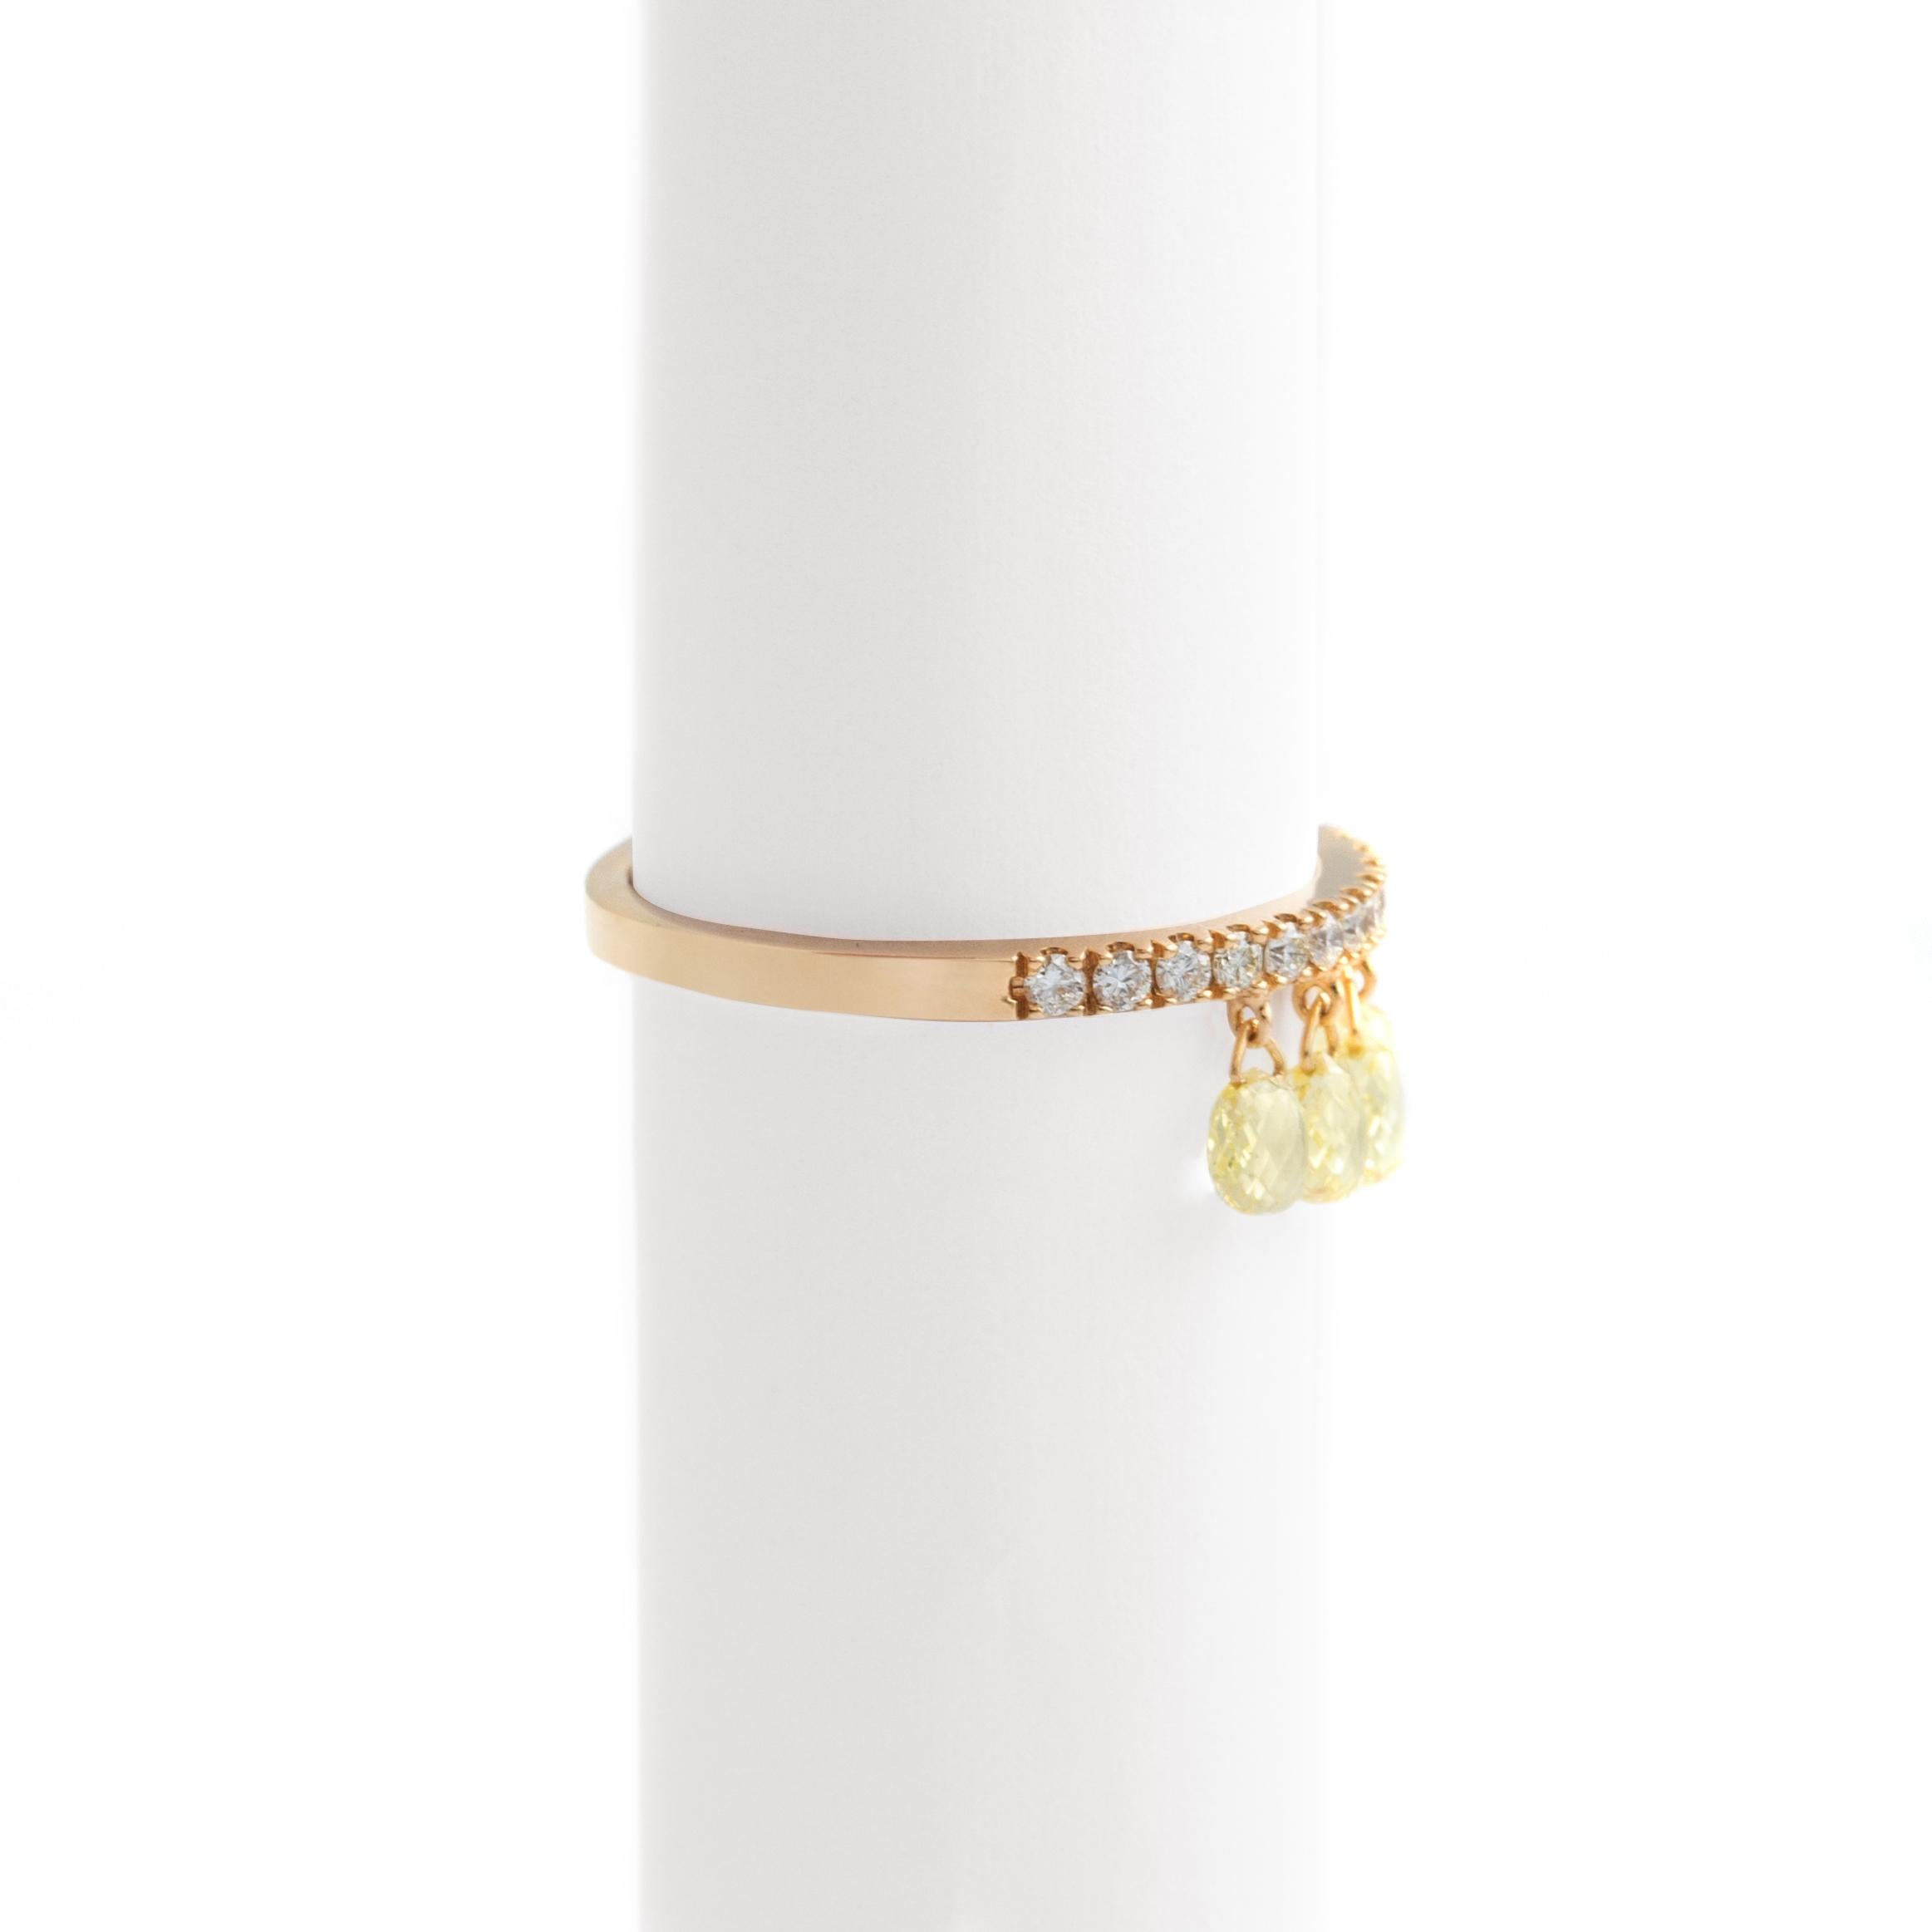 Band Ring in rose gold 18K briolette cut yellow and round cut diamonds 2.01 carat, estimated H color and Si1 clarity.
Total gross weight: 2.27 grams.

Size:  54